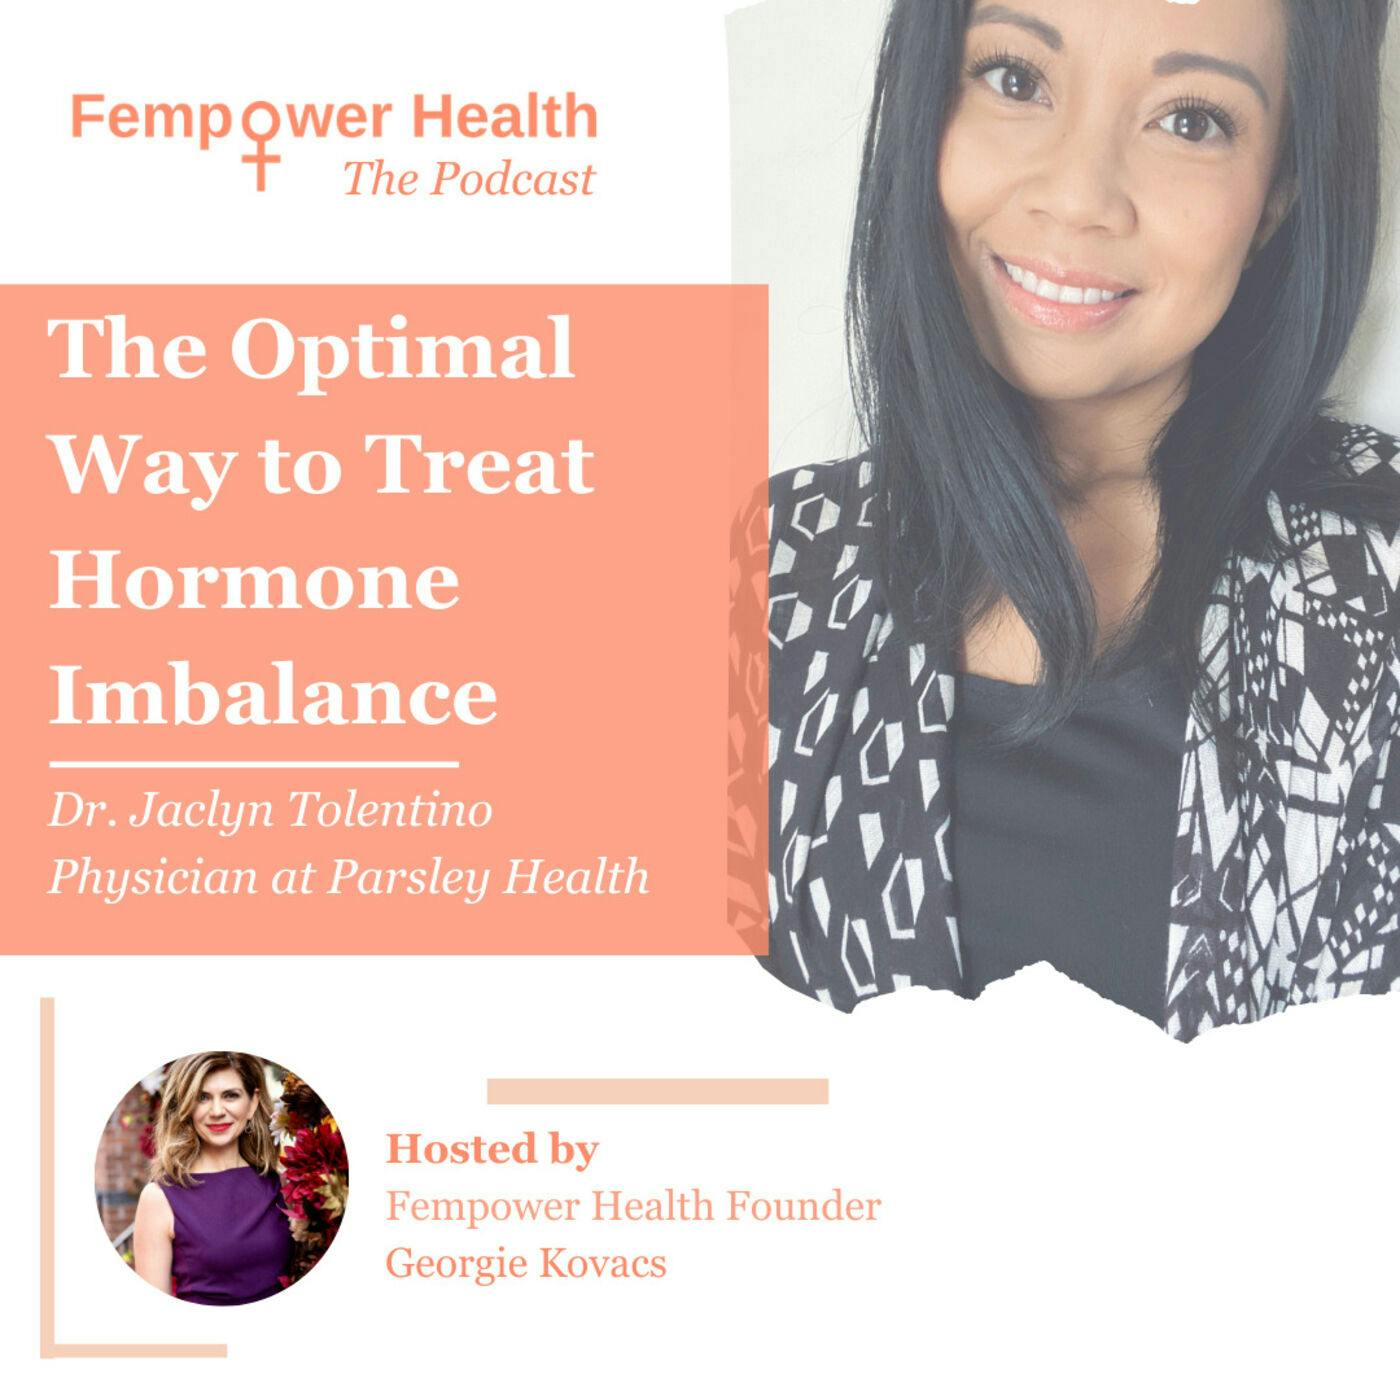 Dr. Jaclyn Tolentino | The Optimal Way to Treat Hormone Imbalance